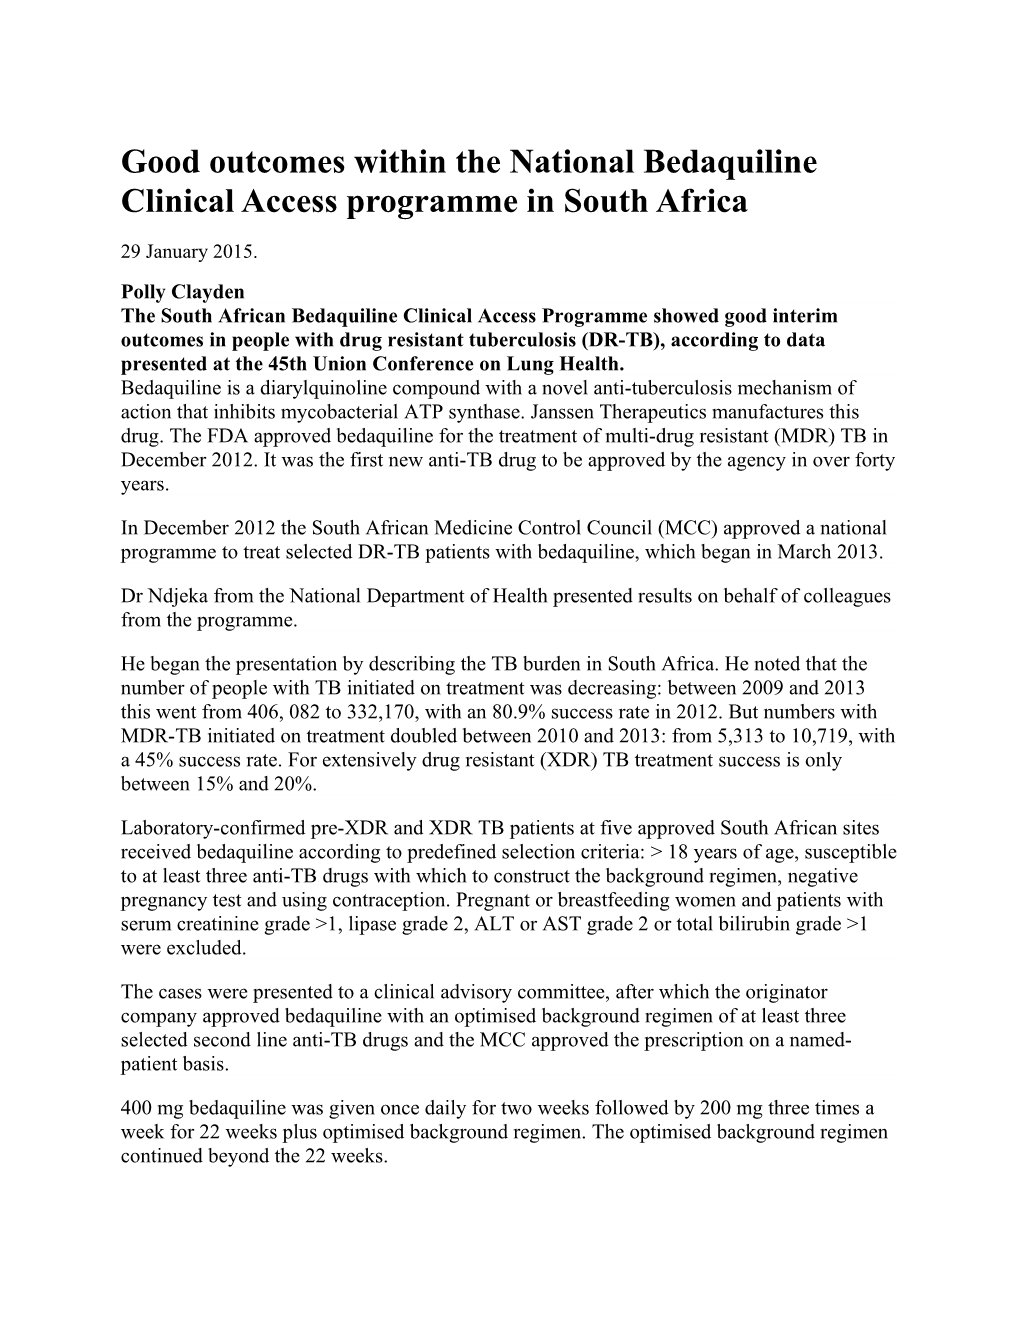 Good Outcomes Within the National Bedaquiline Clinical Access Programme in South Africa